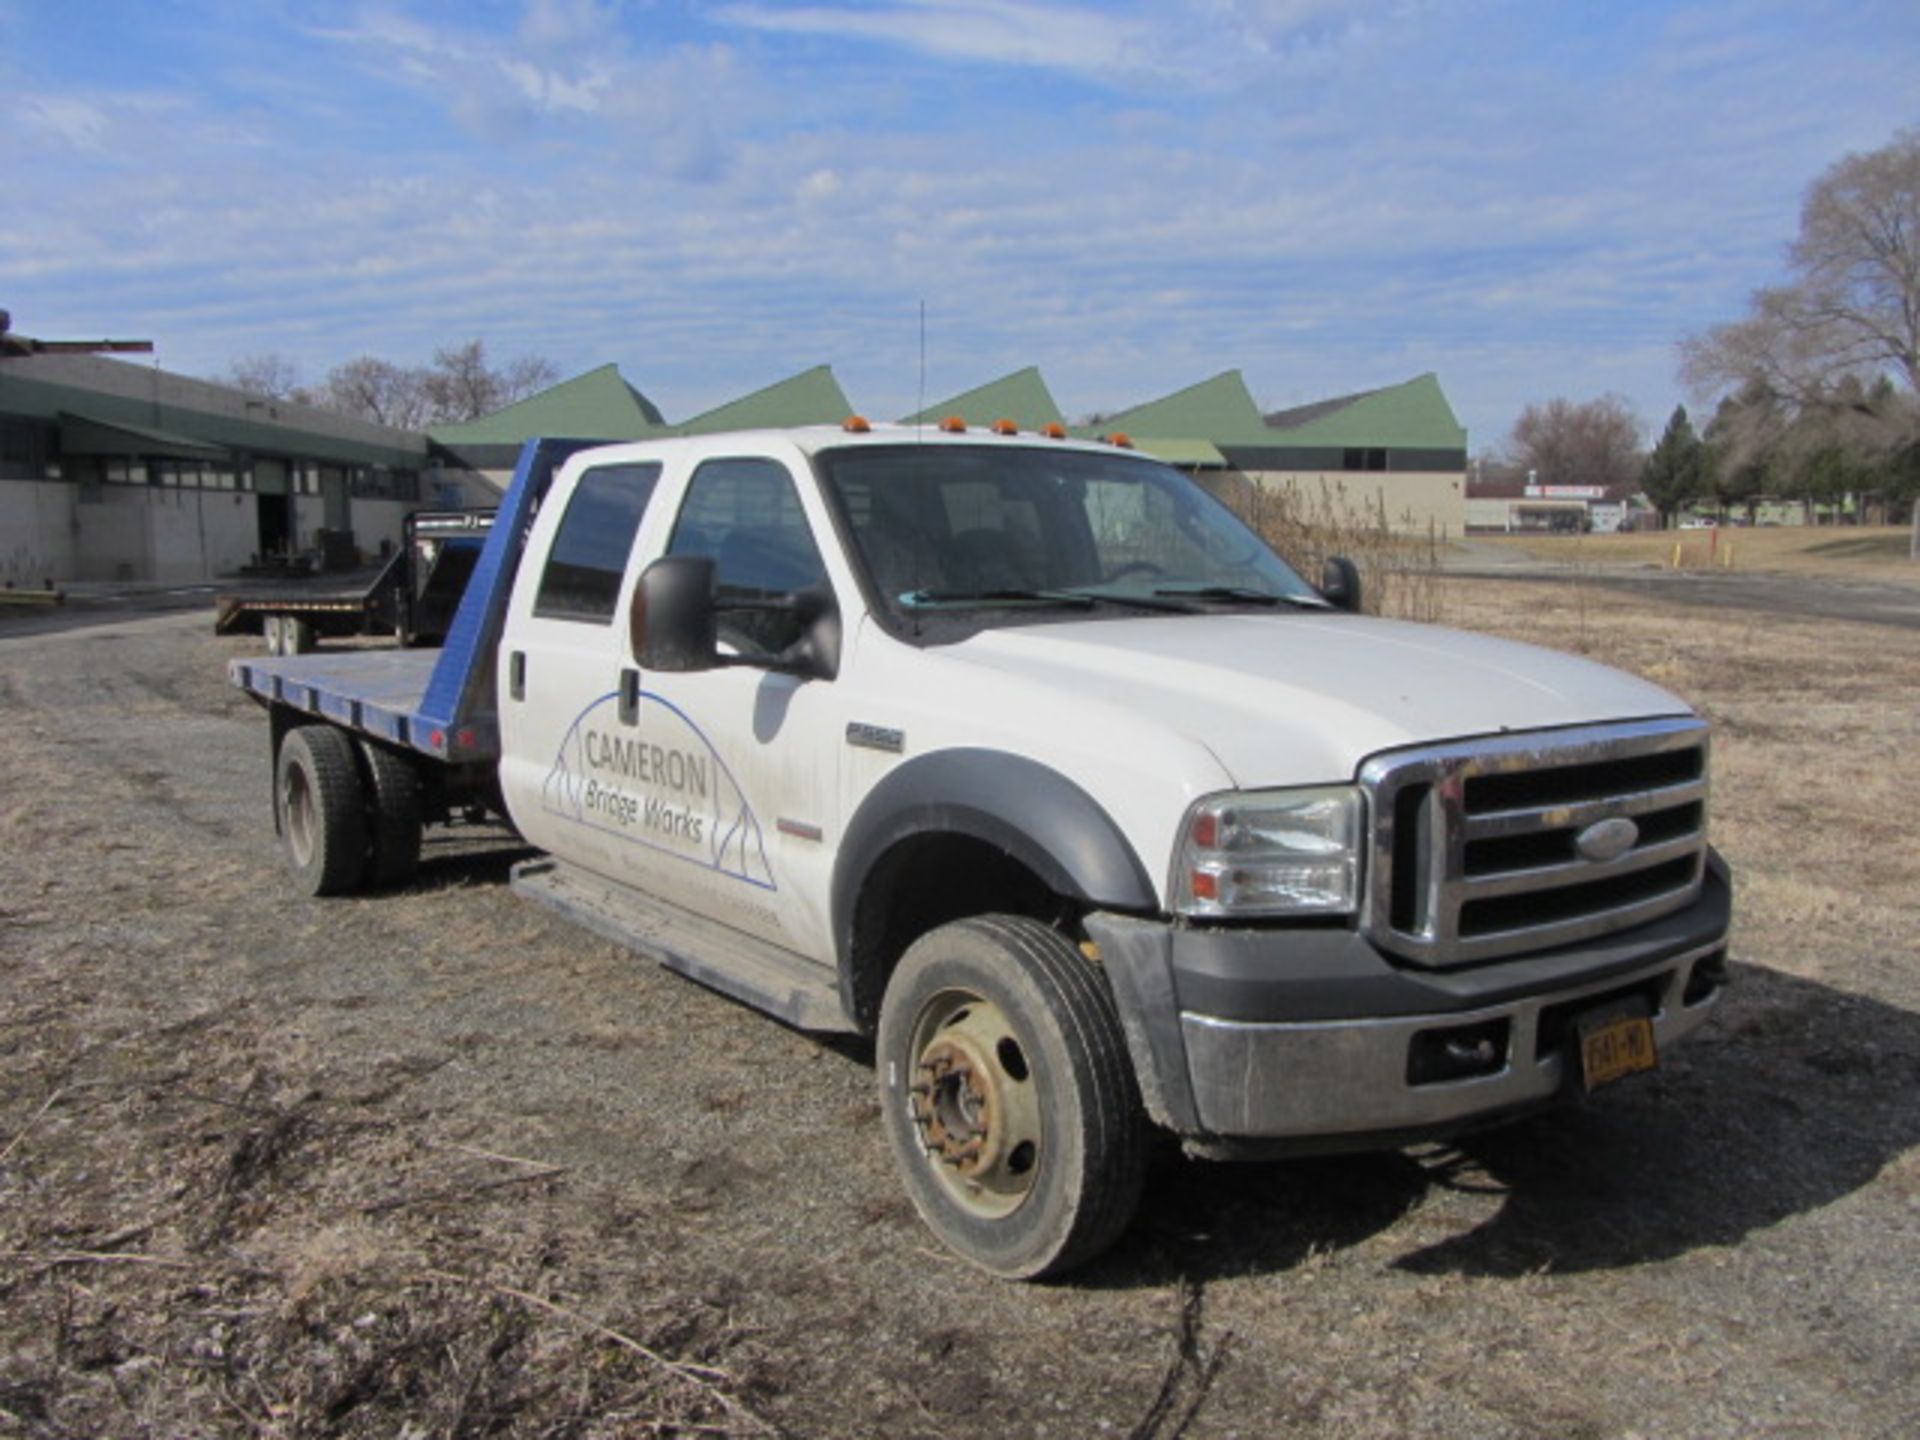 Ford F550 XLT Super Duty Flat Bed Truck with Gooseneck Hitch, 10' Diamond Plate Deck, Dual Rear - Image 2 of 6